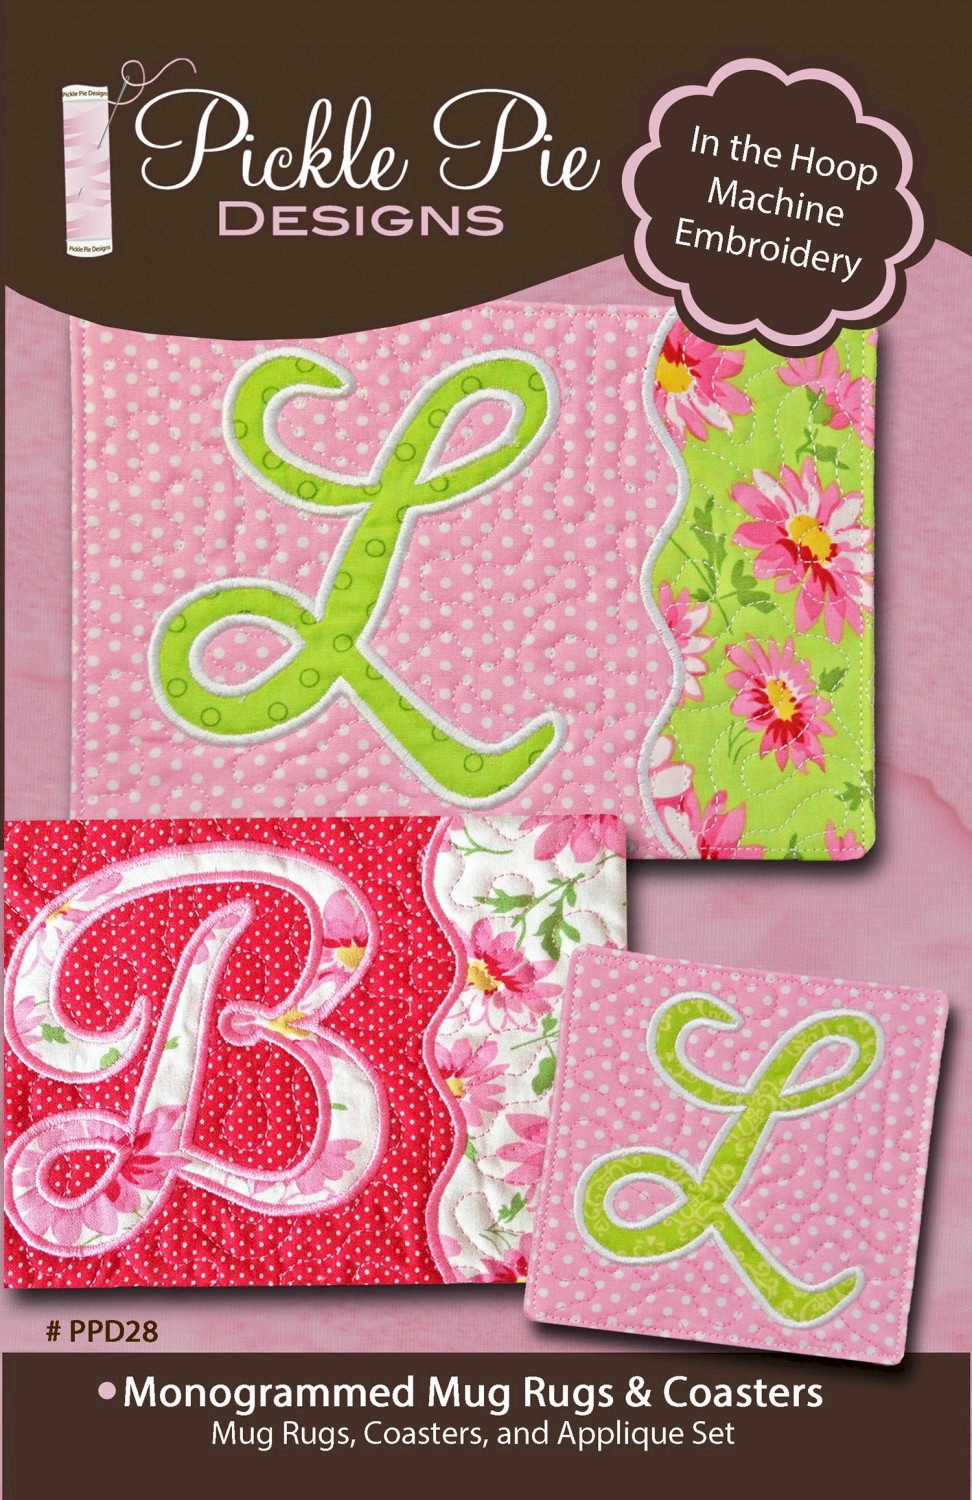 Monogrammed Mug Rugs & Coasters Collection Embroidery Designs on CD-ROM by Pickle Pie Designs